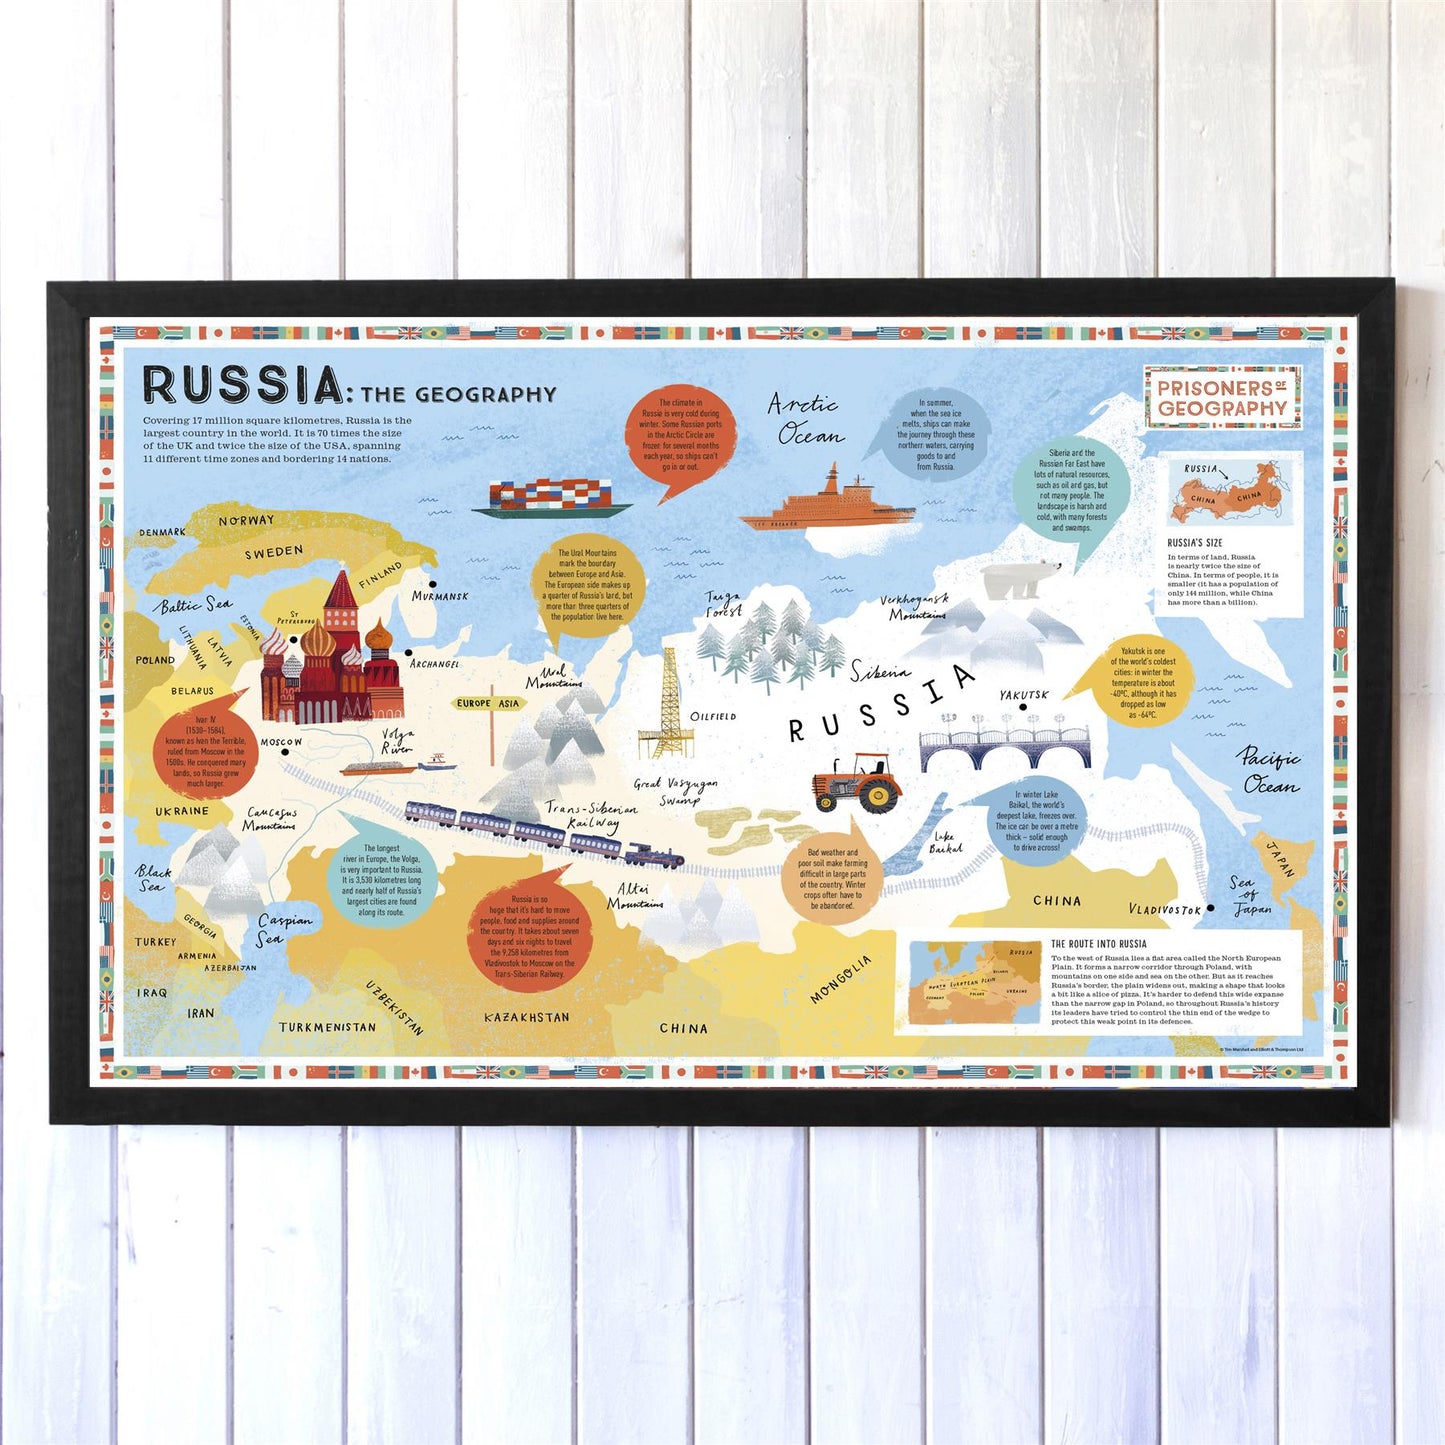 Prisoners of Geography Russia Educational Wall Map